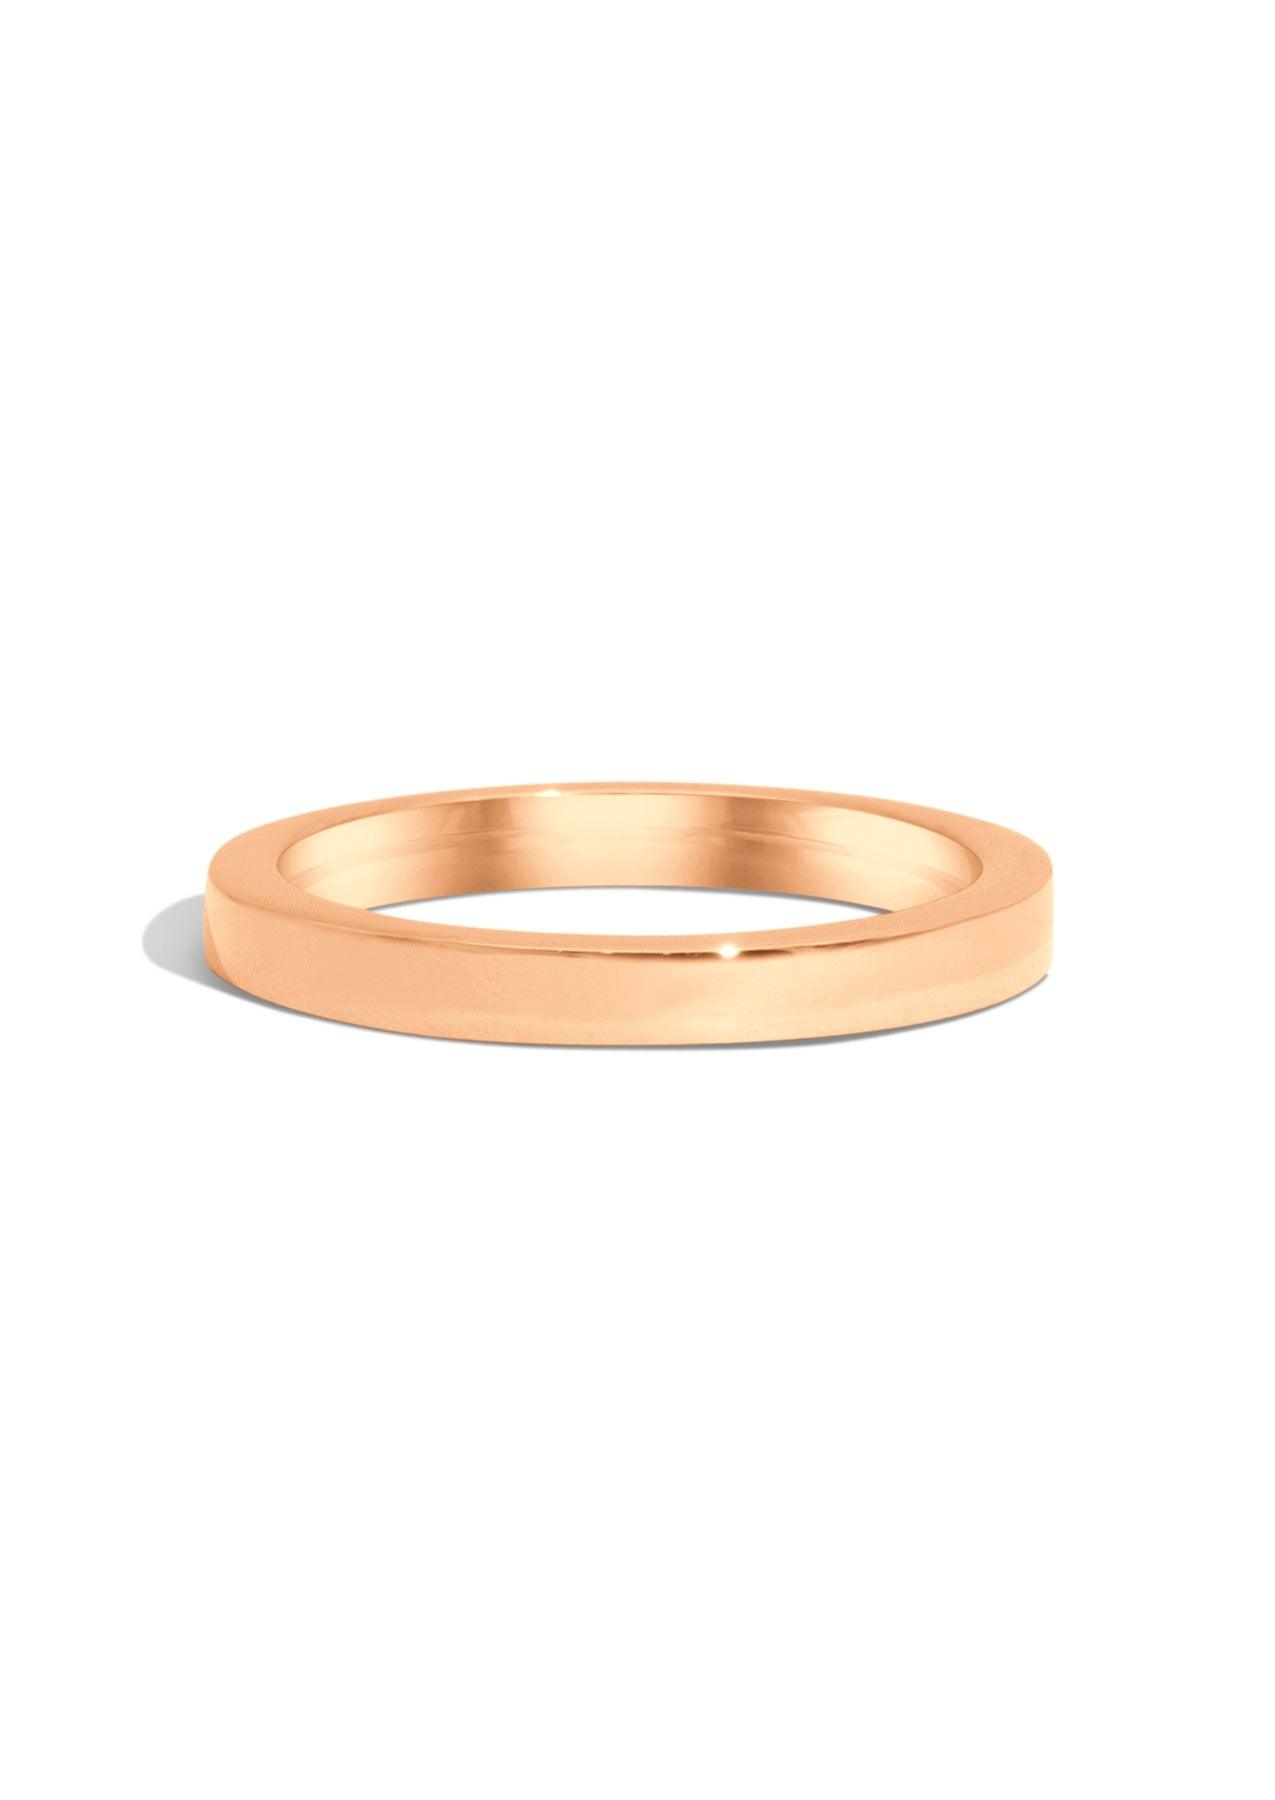 The Crest Rose Gold Band